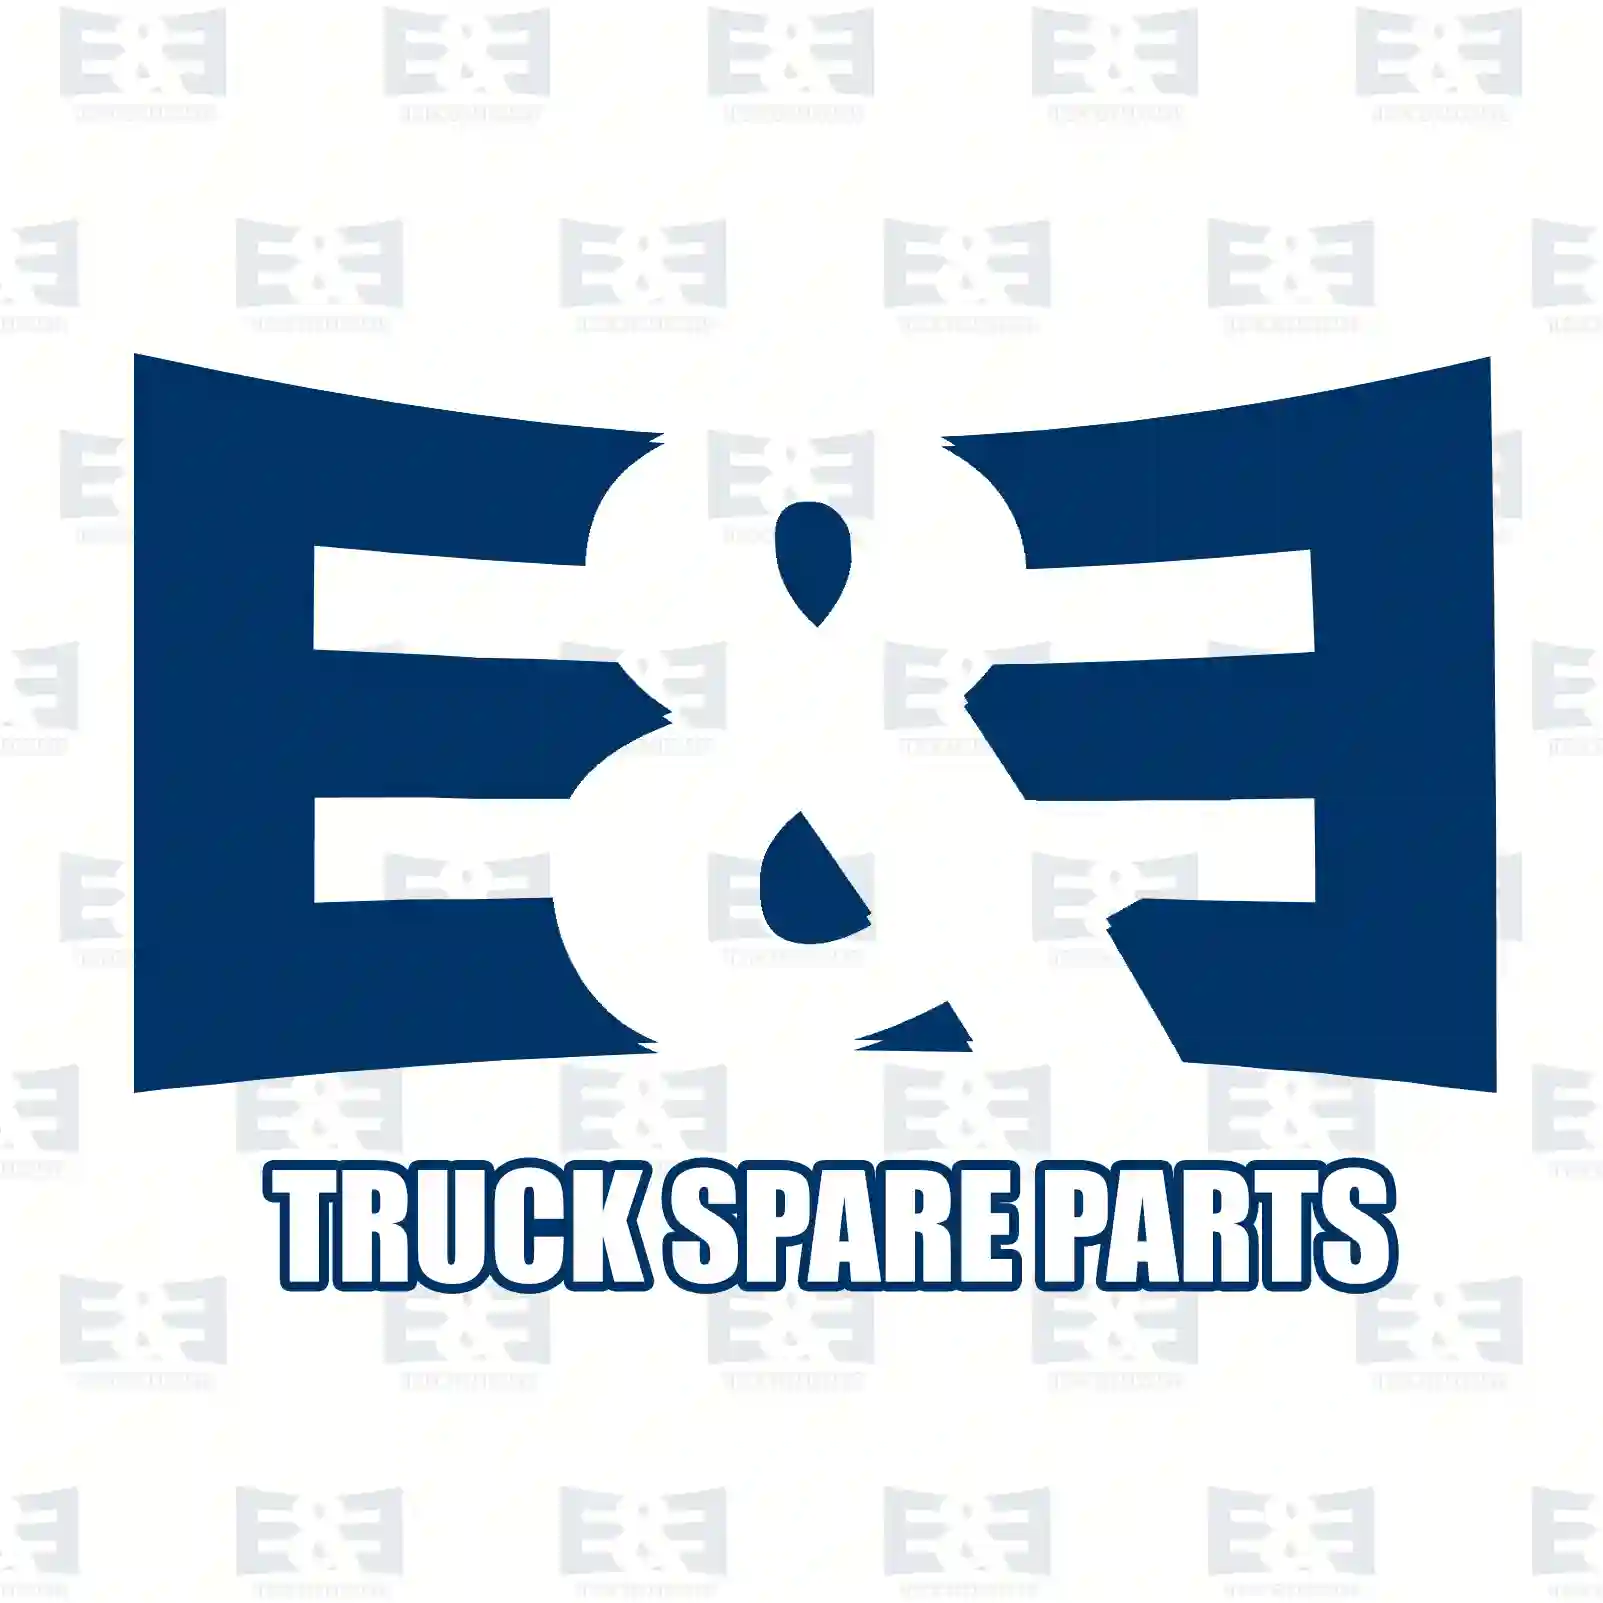  Control cylinder housing || E&E Truck Spare Parts | Truck Spare Parts, Auotomotive Spare Parts